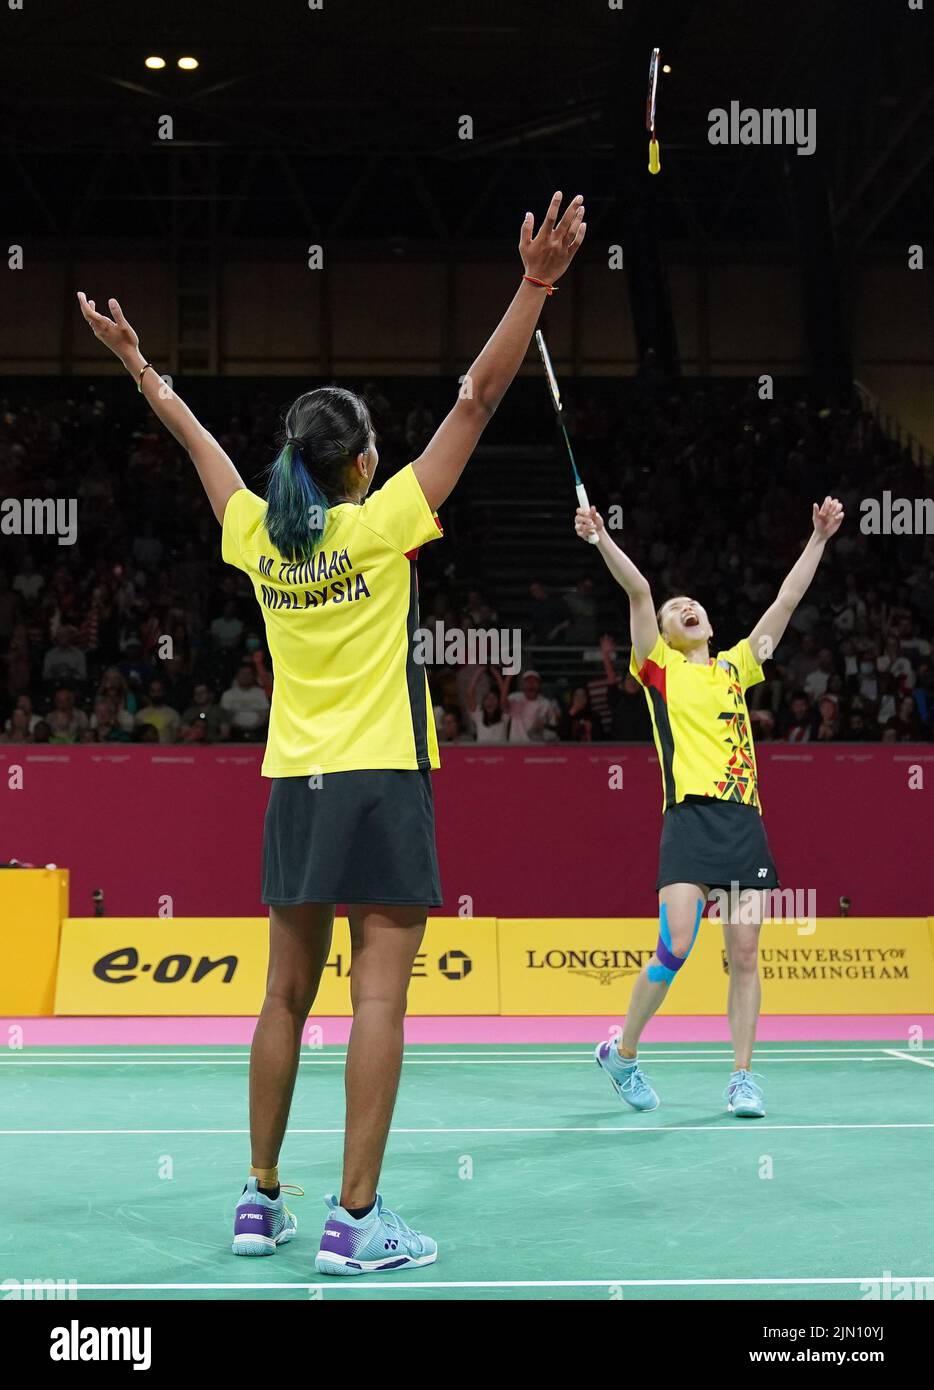 Malaysia's Muralitharan Thinaah and Koong Le Pearly Tan celebrate after  winning gold in the the Women's Doubles badminton at The NEC on day eleven  of the 2022 Commonwealth Games in Birmingham. Picture